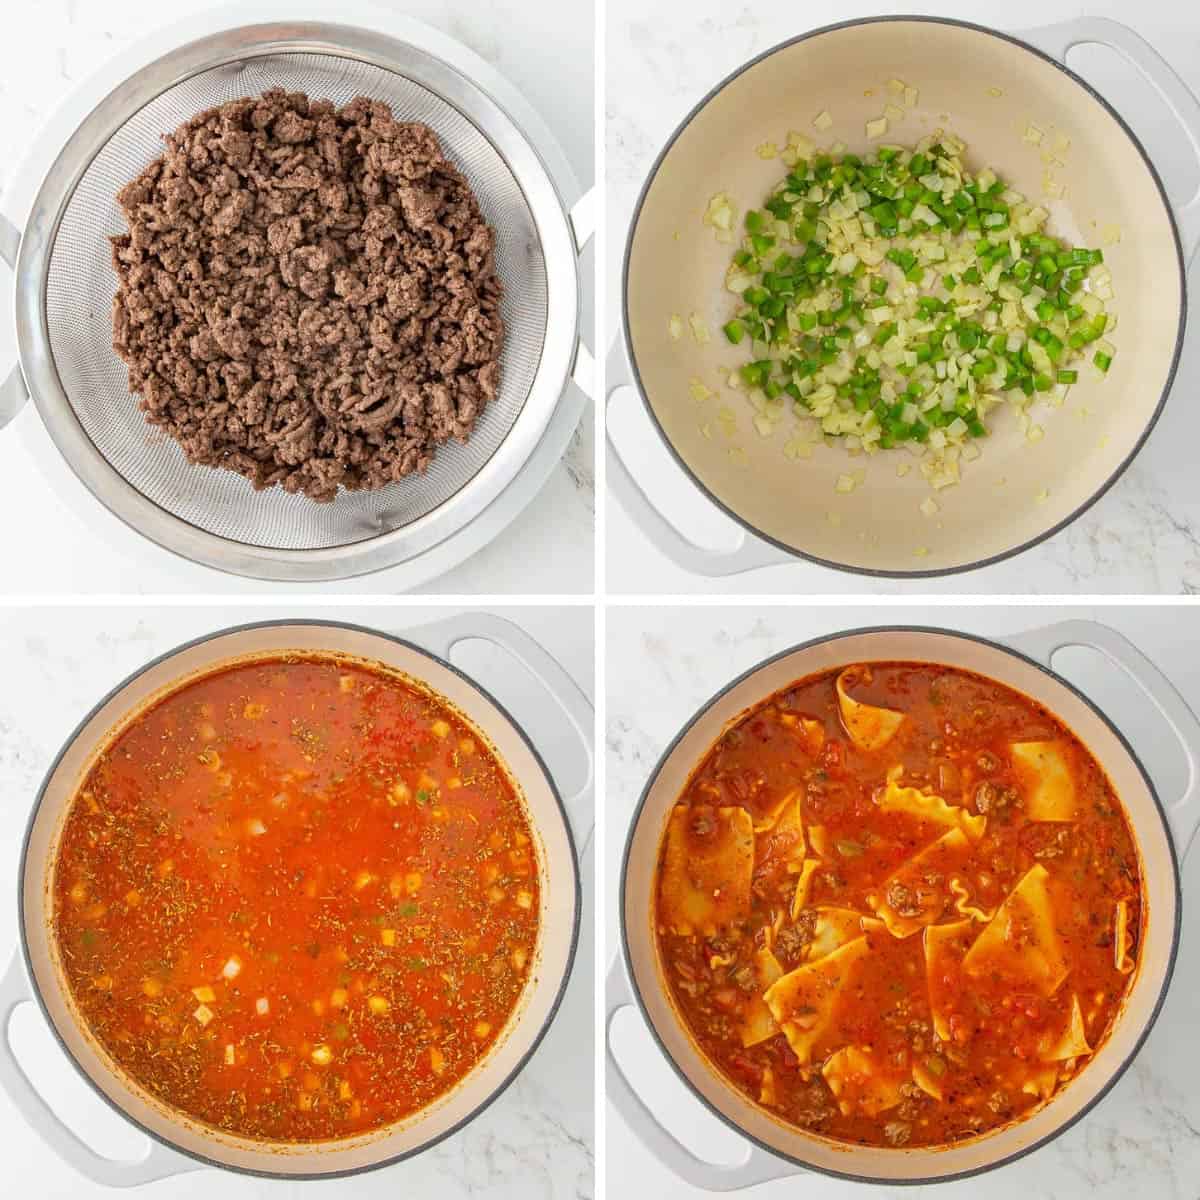 Step-by-step photos showing how to make lasagna soup.